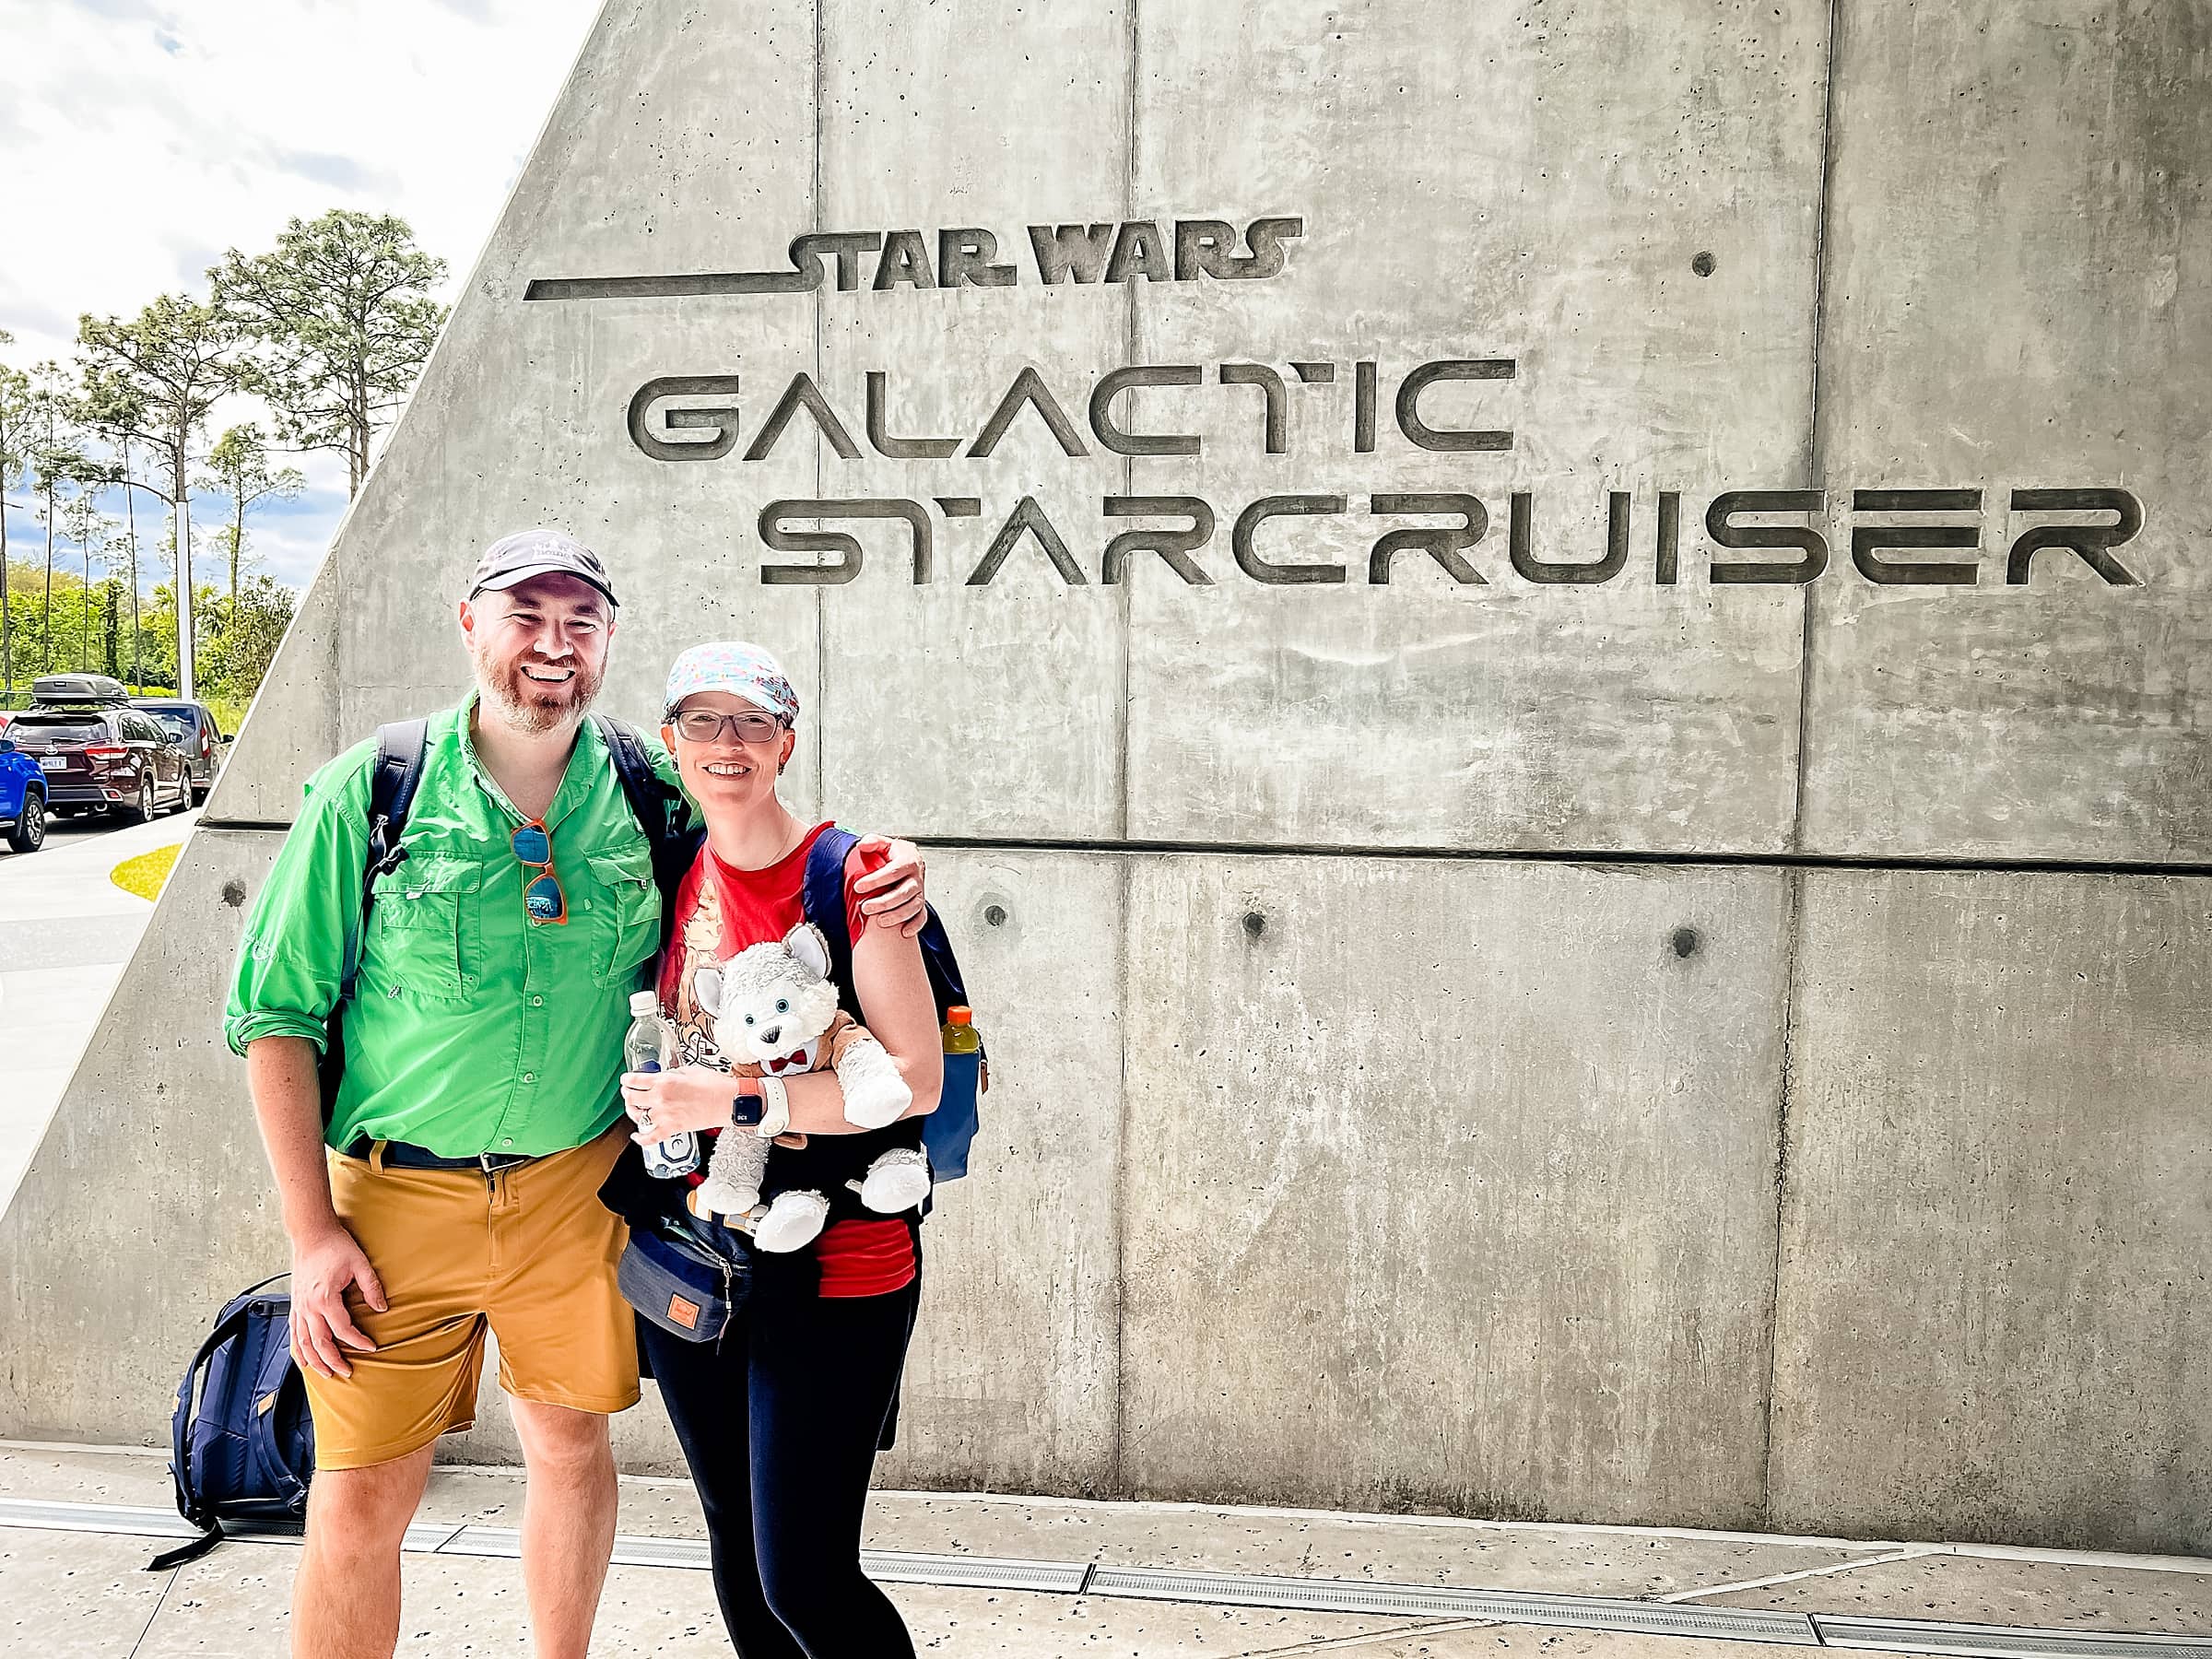 Review of the Star Wars Galactic Starcruiser at Walt Disney World